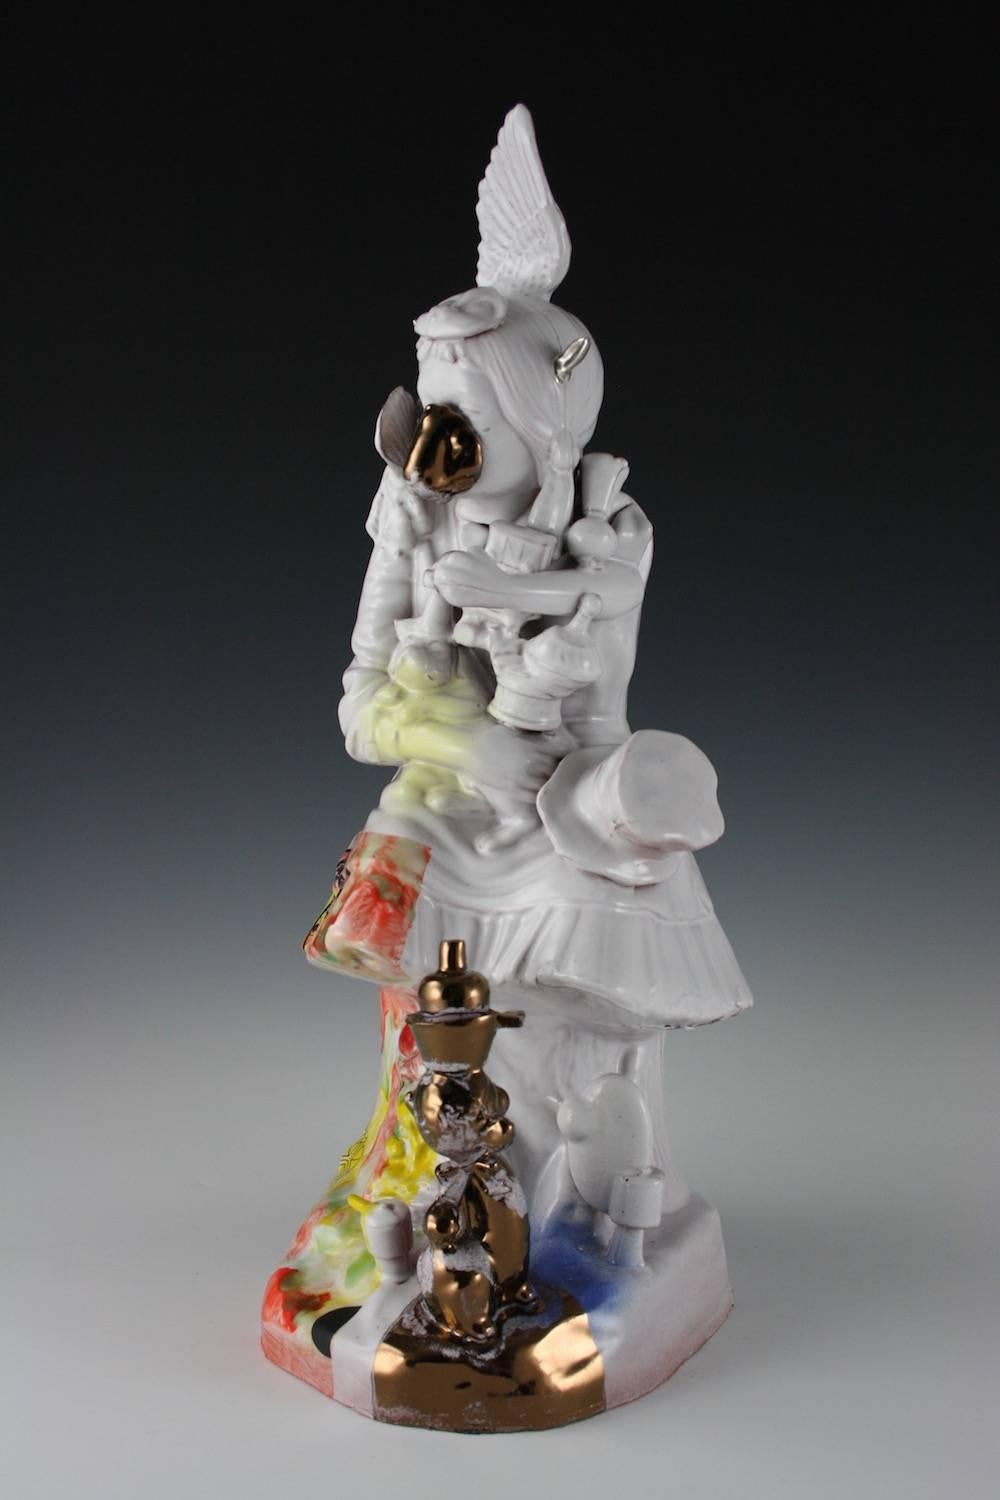 Paul McMullan's work explores collaged elements of pieced together earthenware while simultaneously maintaining a sort of formal elegance. Utilizing glazes, lusters, and full color decals, McMullan's work is a multi-faceted experience that prompts